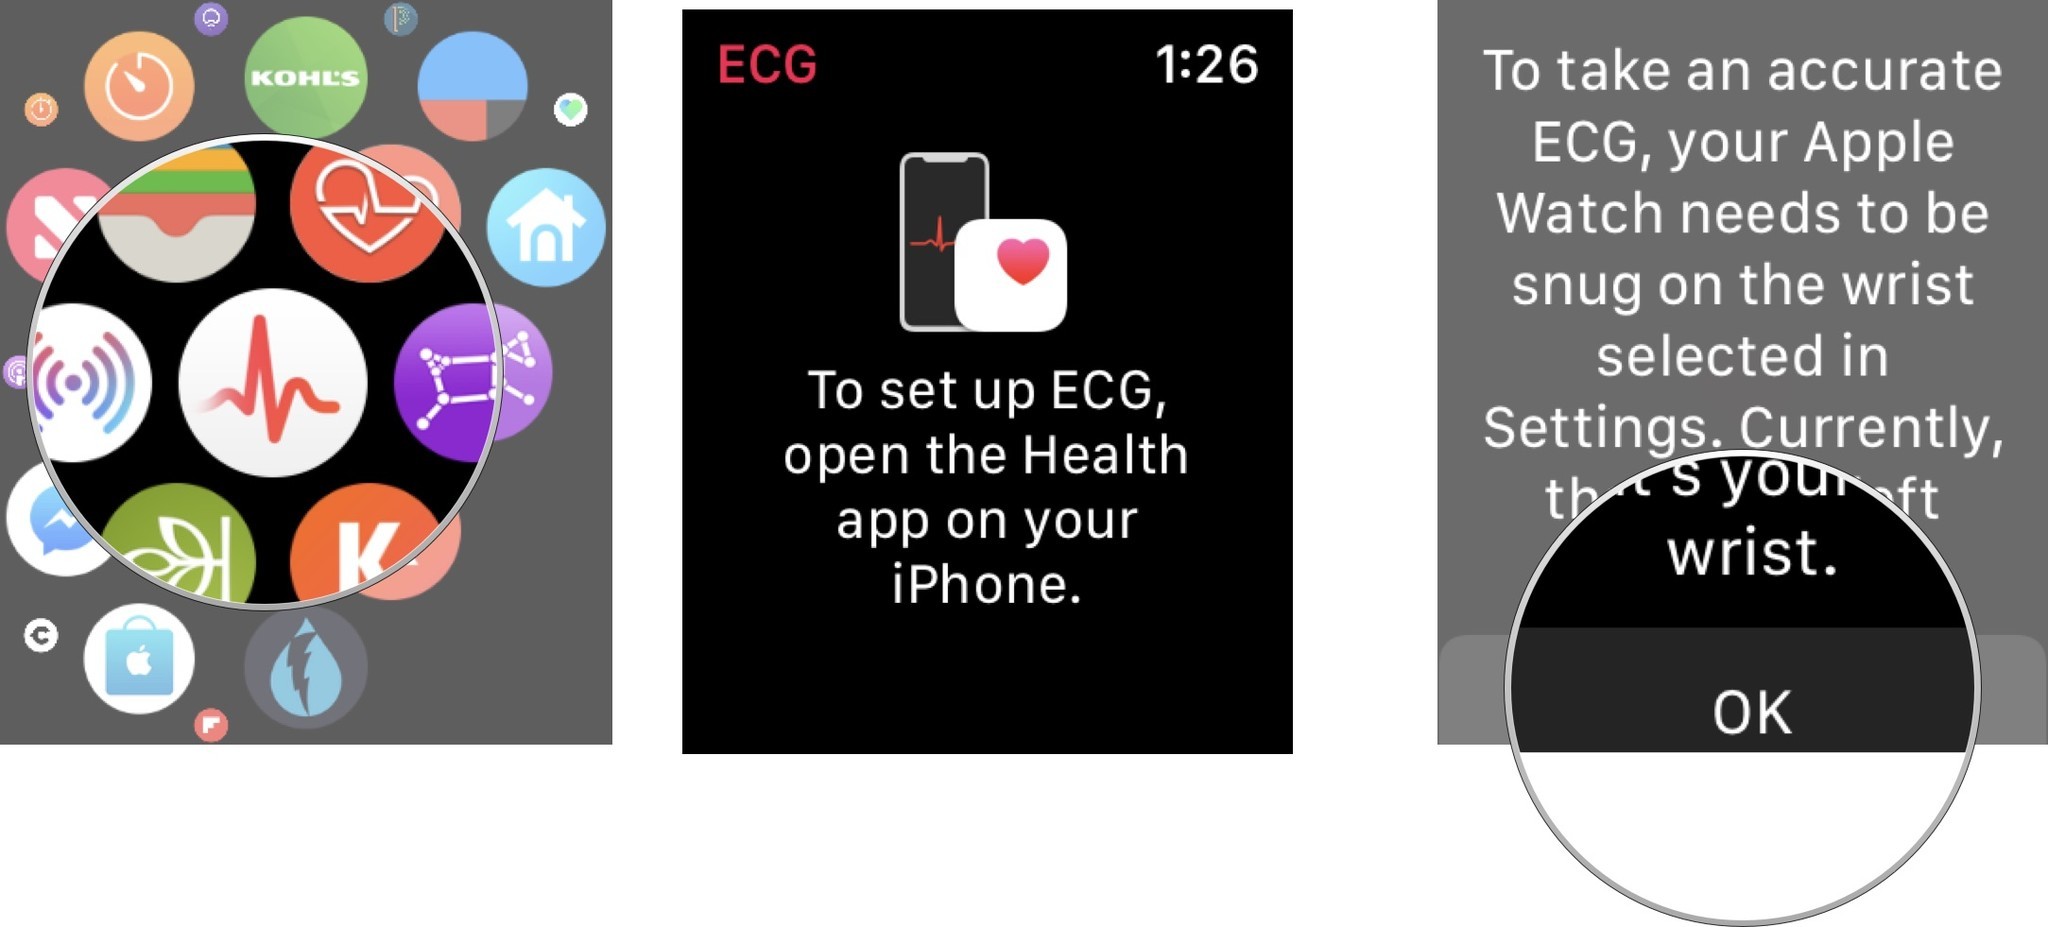 To set up and use the ECG app for the first time, push the Digital Crown on Apple Watch, Tap ECG app, Hit okay on confirmation screen.